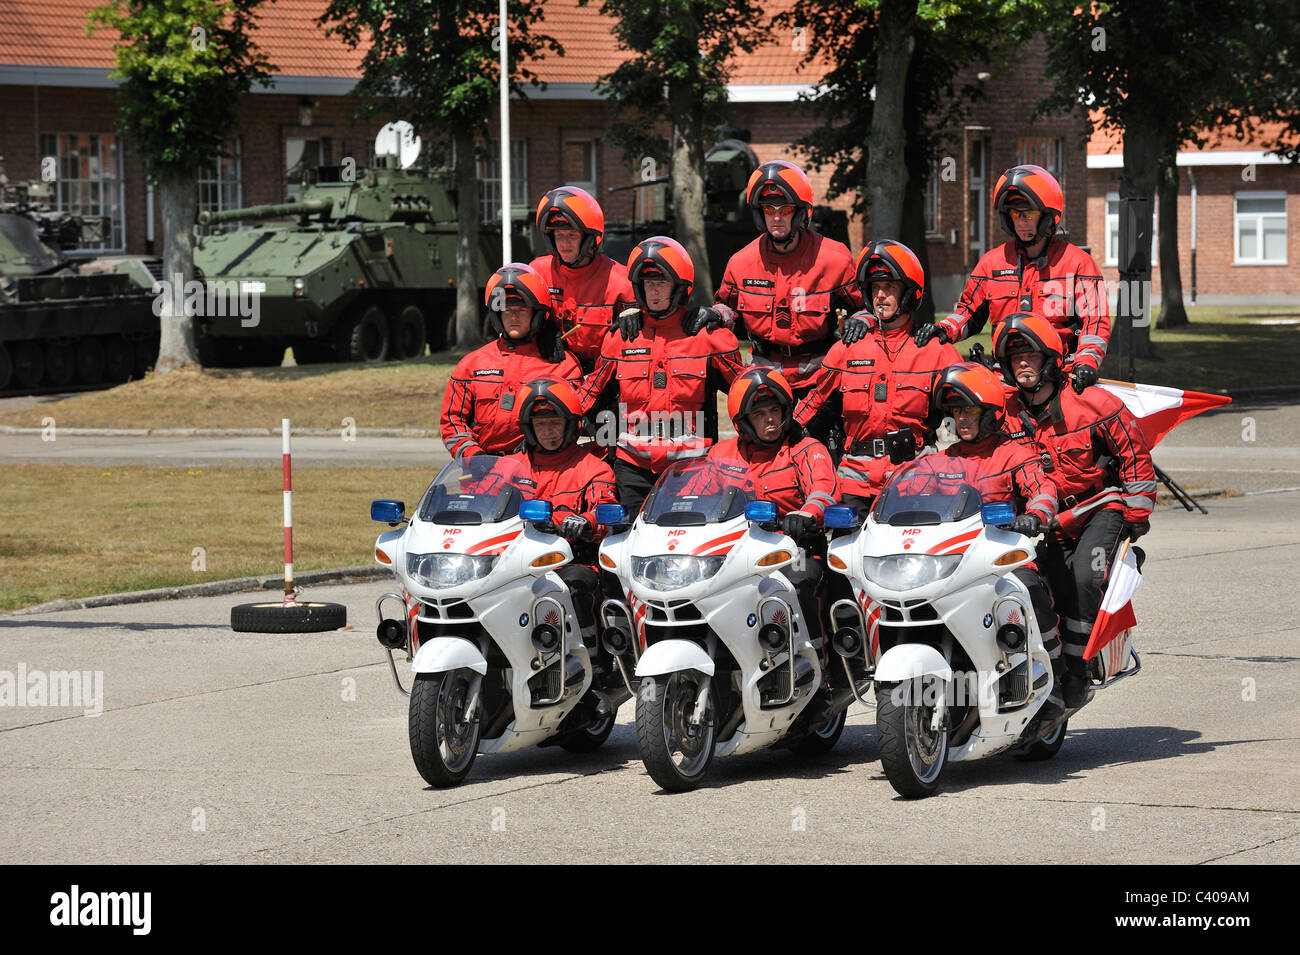 Demonstration of the Belgian Military Police on motorbikes during open day of the Belgian army at Leopoldsburg, Belgium Stock Photo